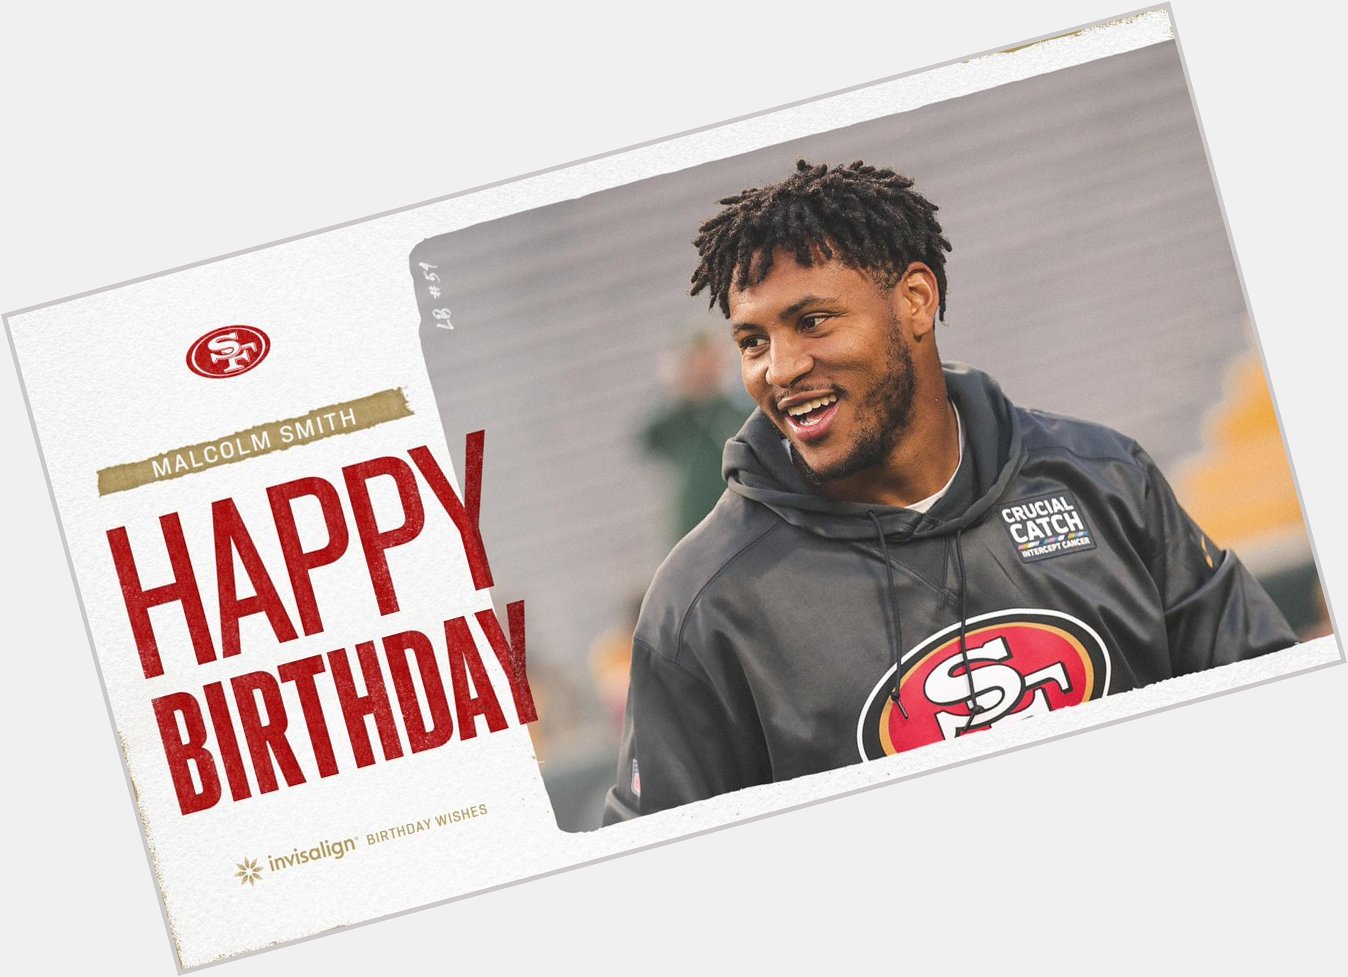 Join us in wishing Malcolm Smith a very happy birthday! 